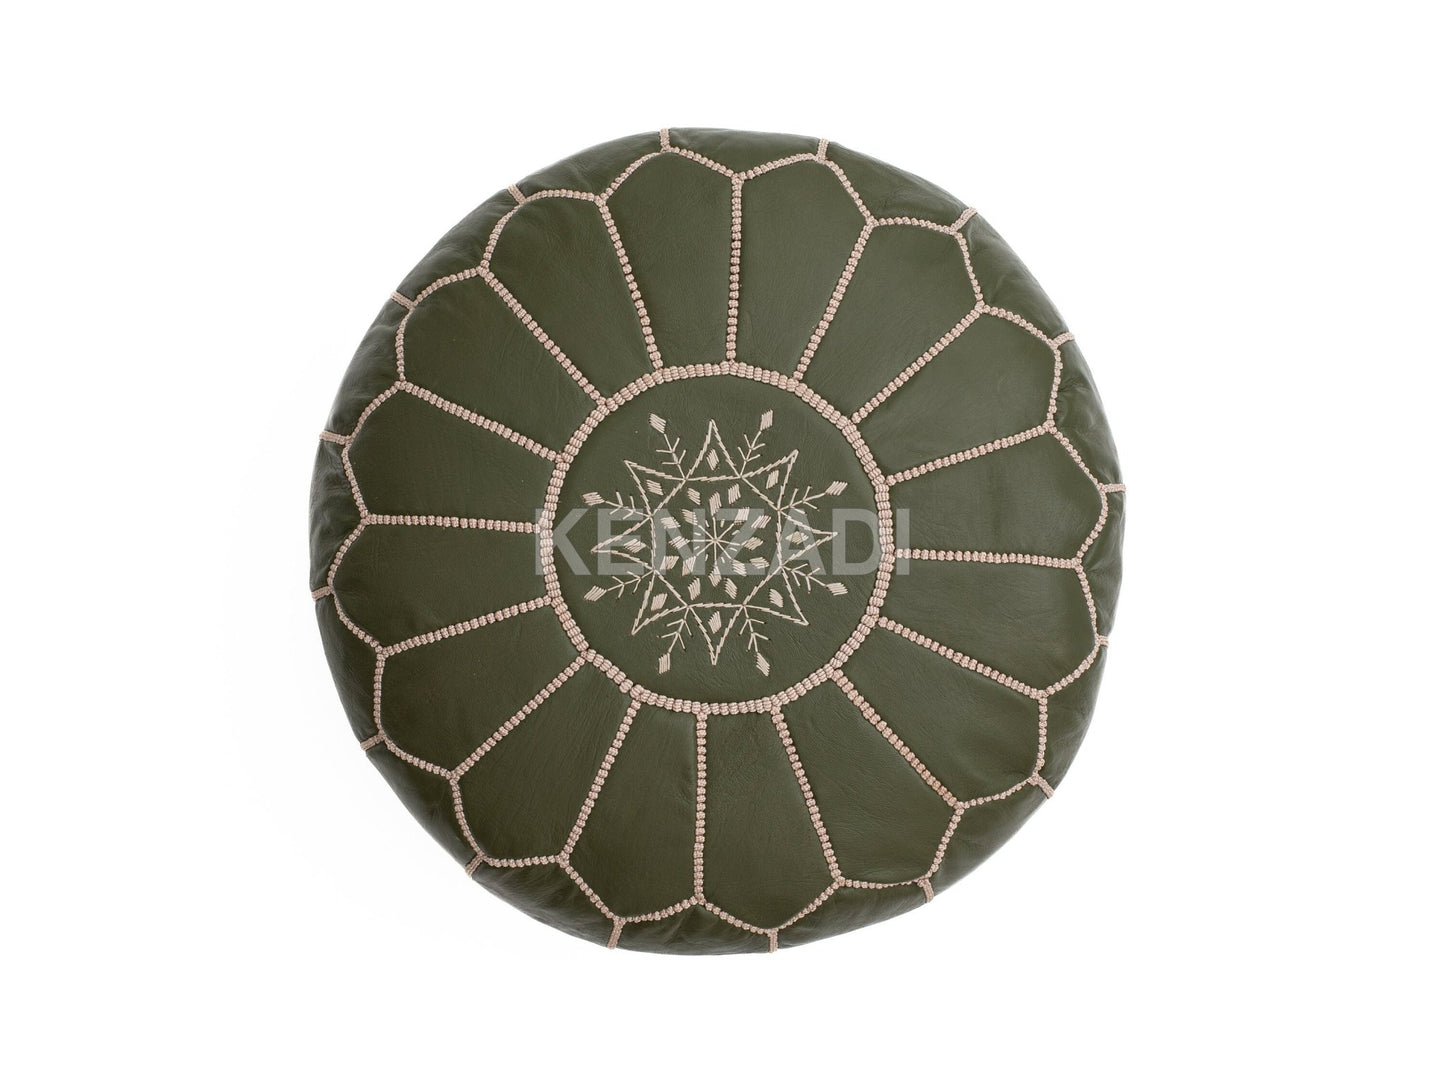 Authentic Moroccan round leather pouf in sewn TAN leather with crocodile green embroidery and beige accents. Handmade and versatile, perfect for any room in your home